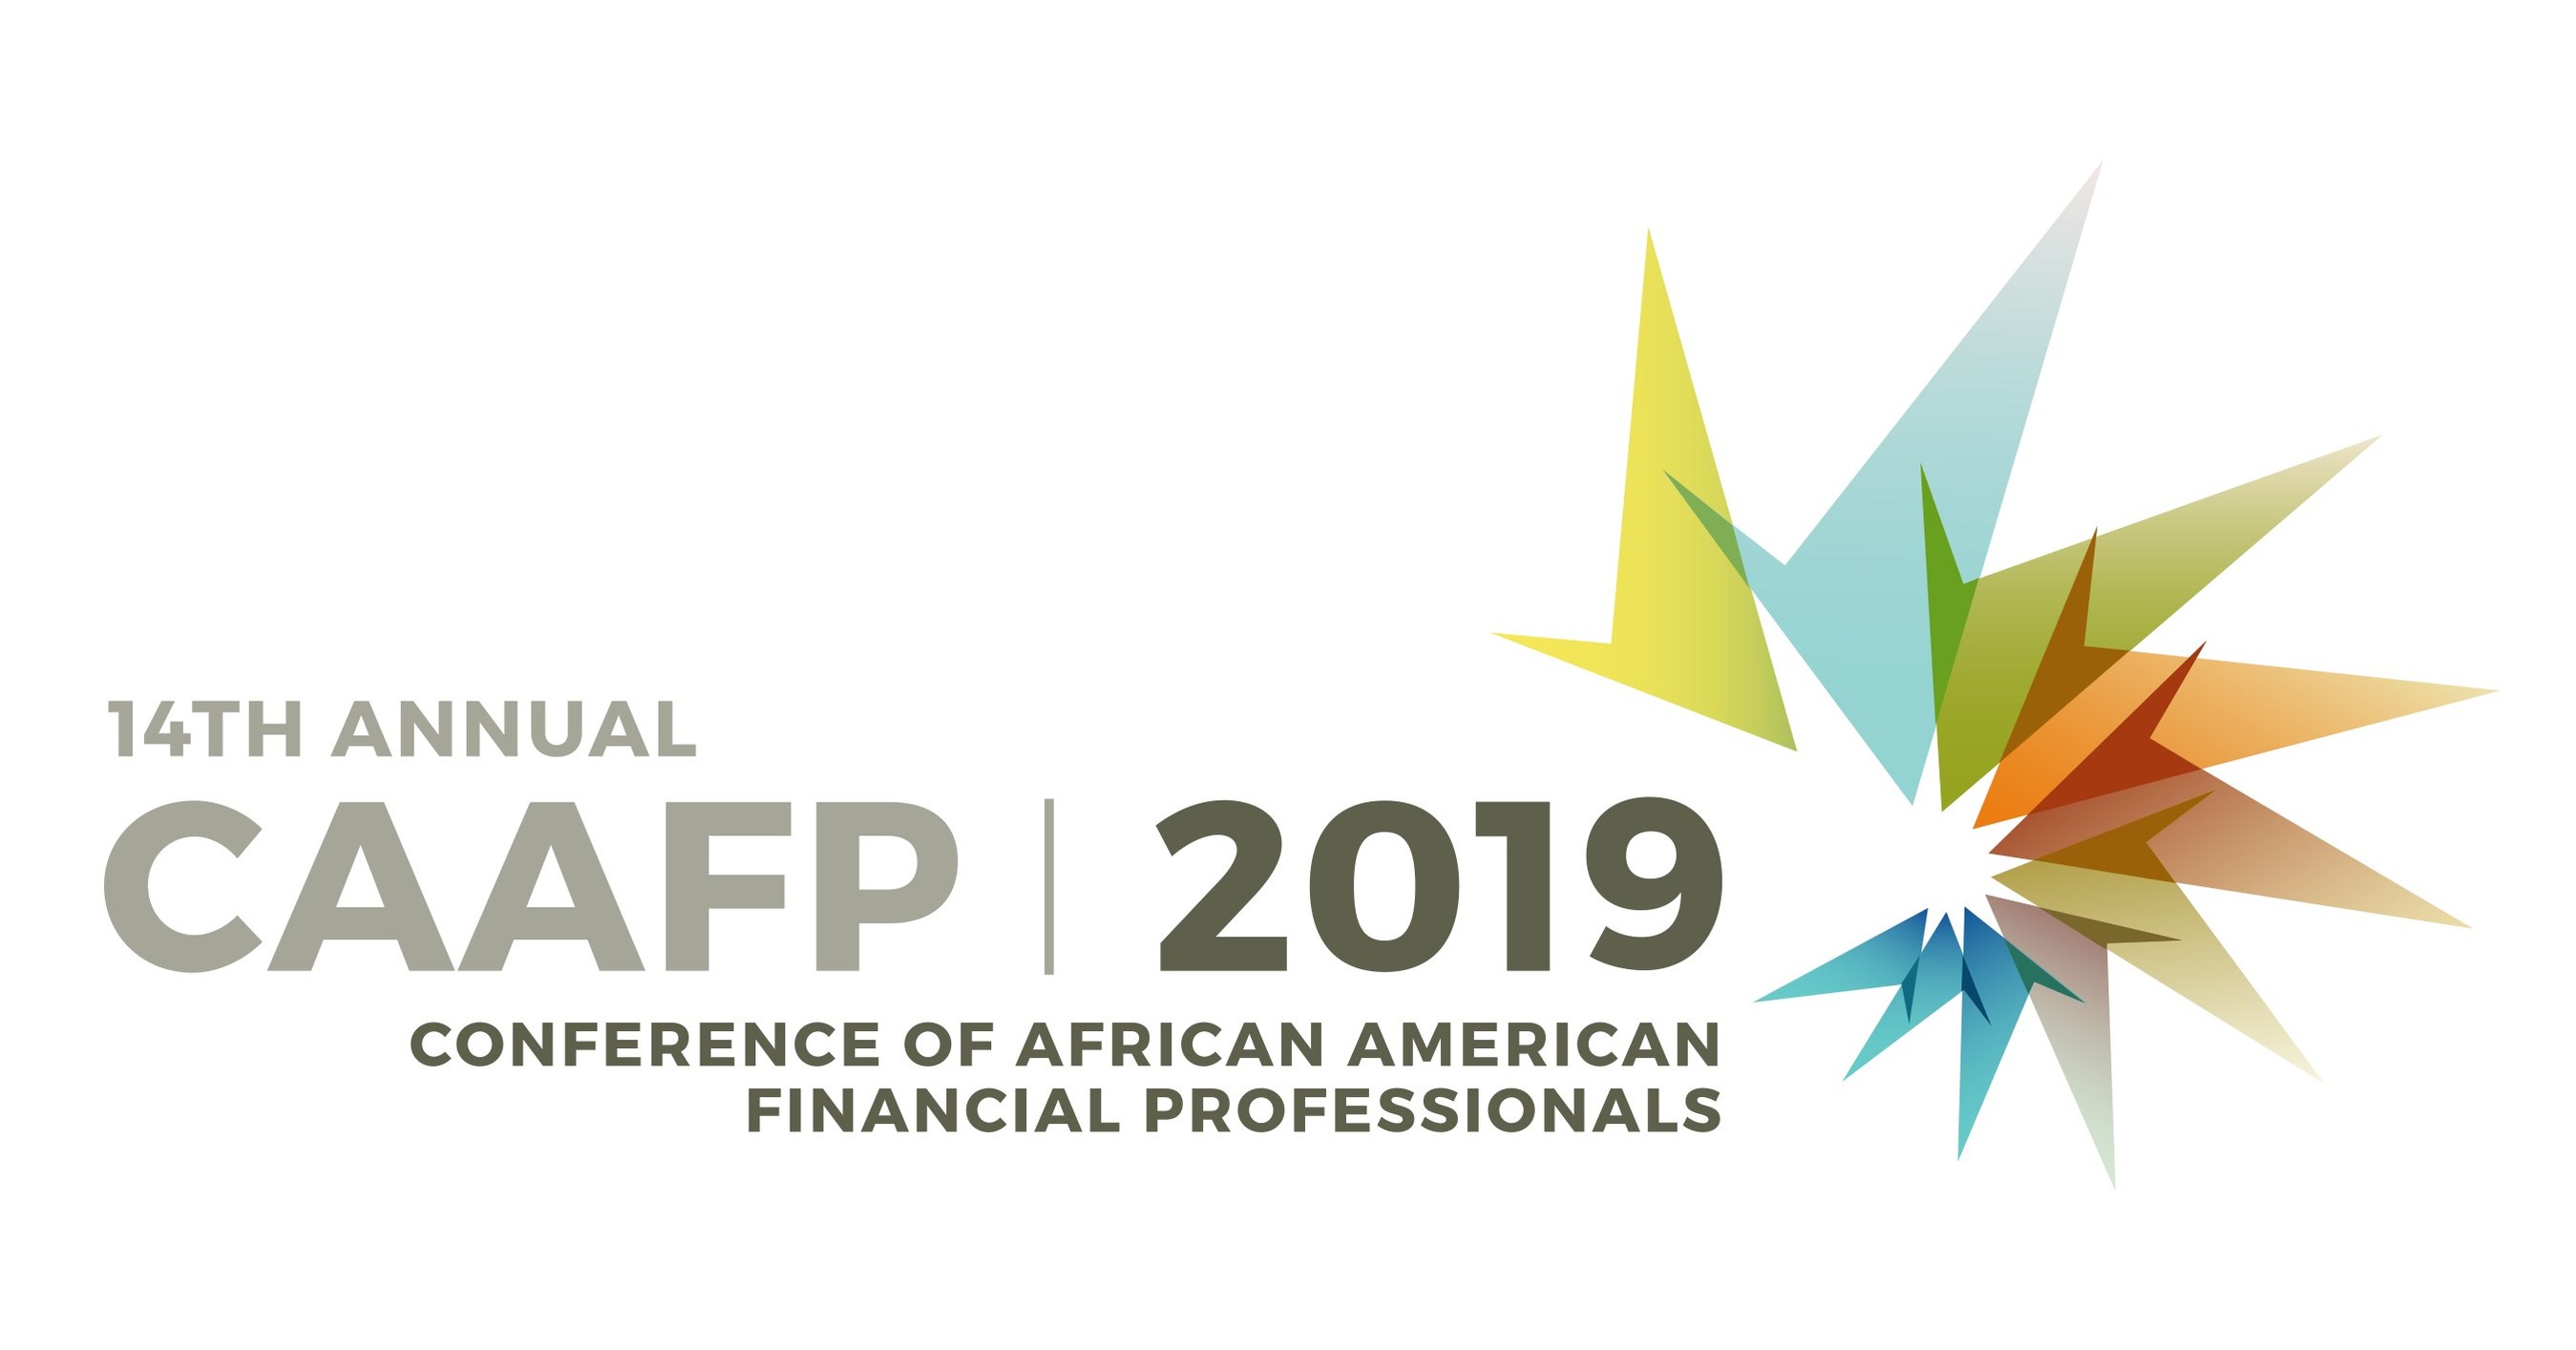 The American College of Financial Services to Host 14th Annual National Conference of African